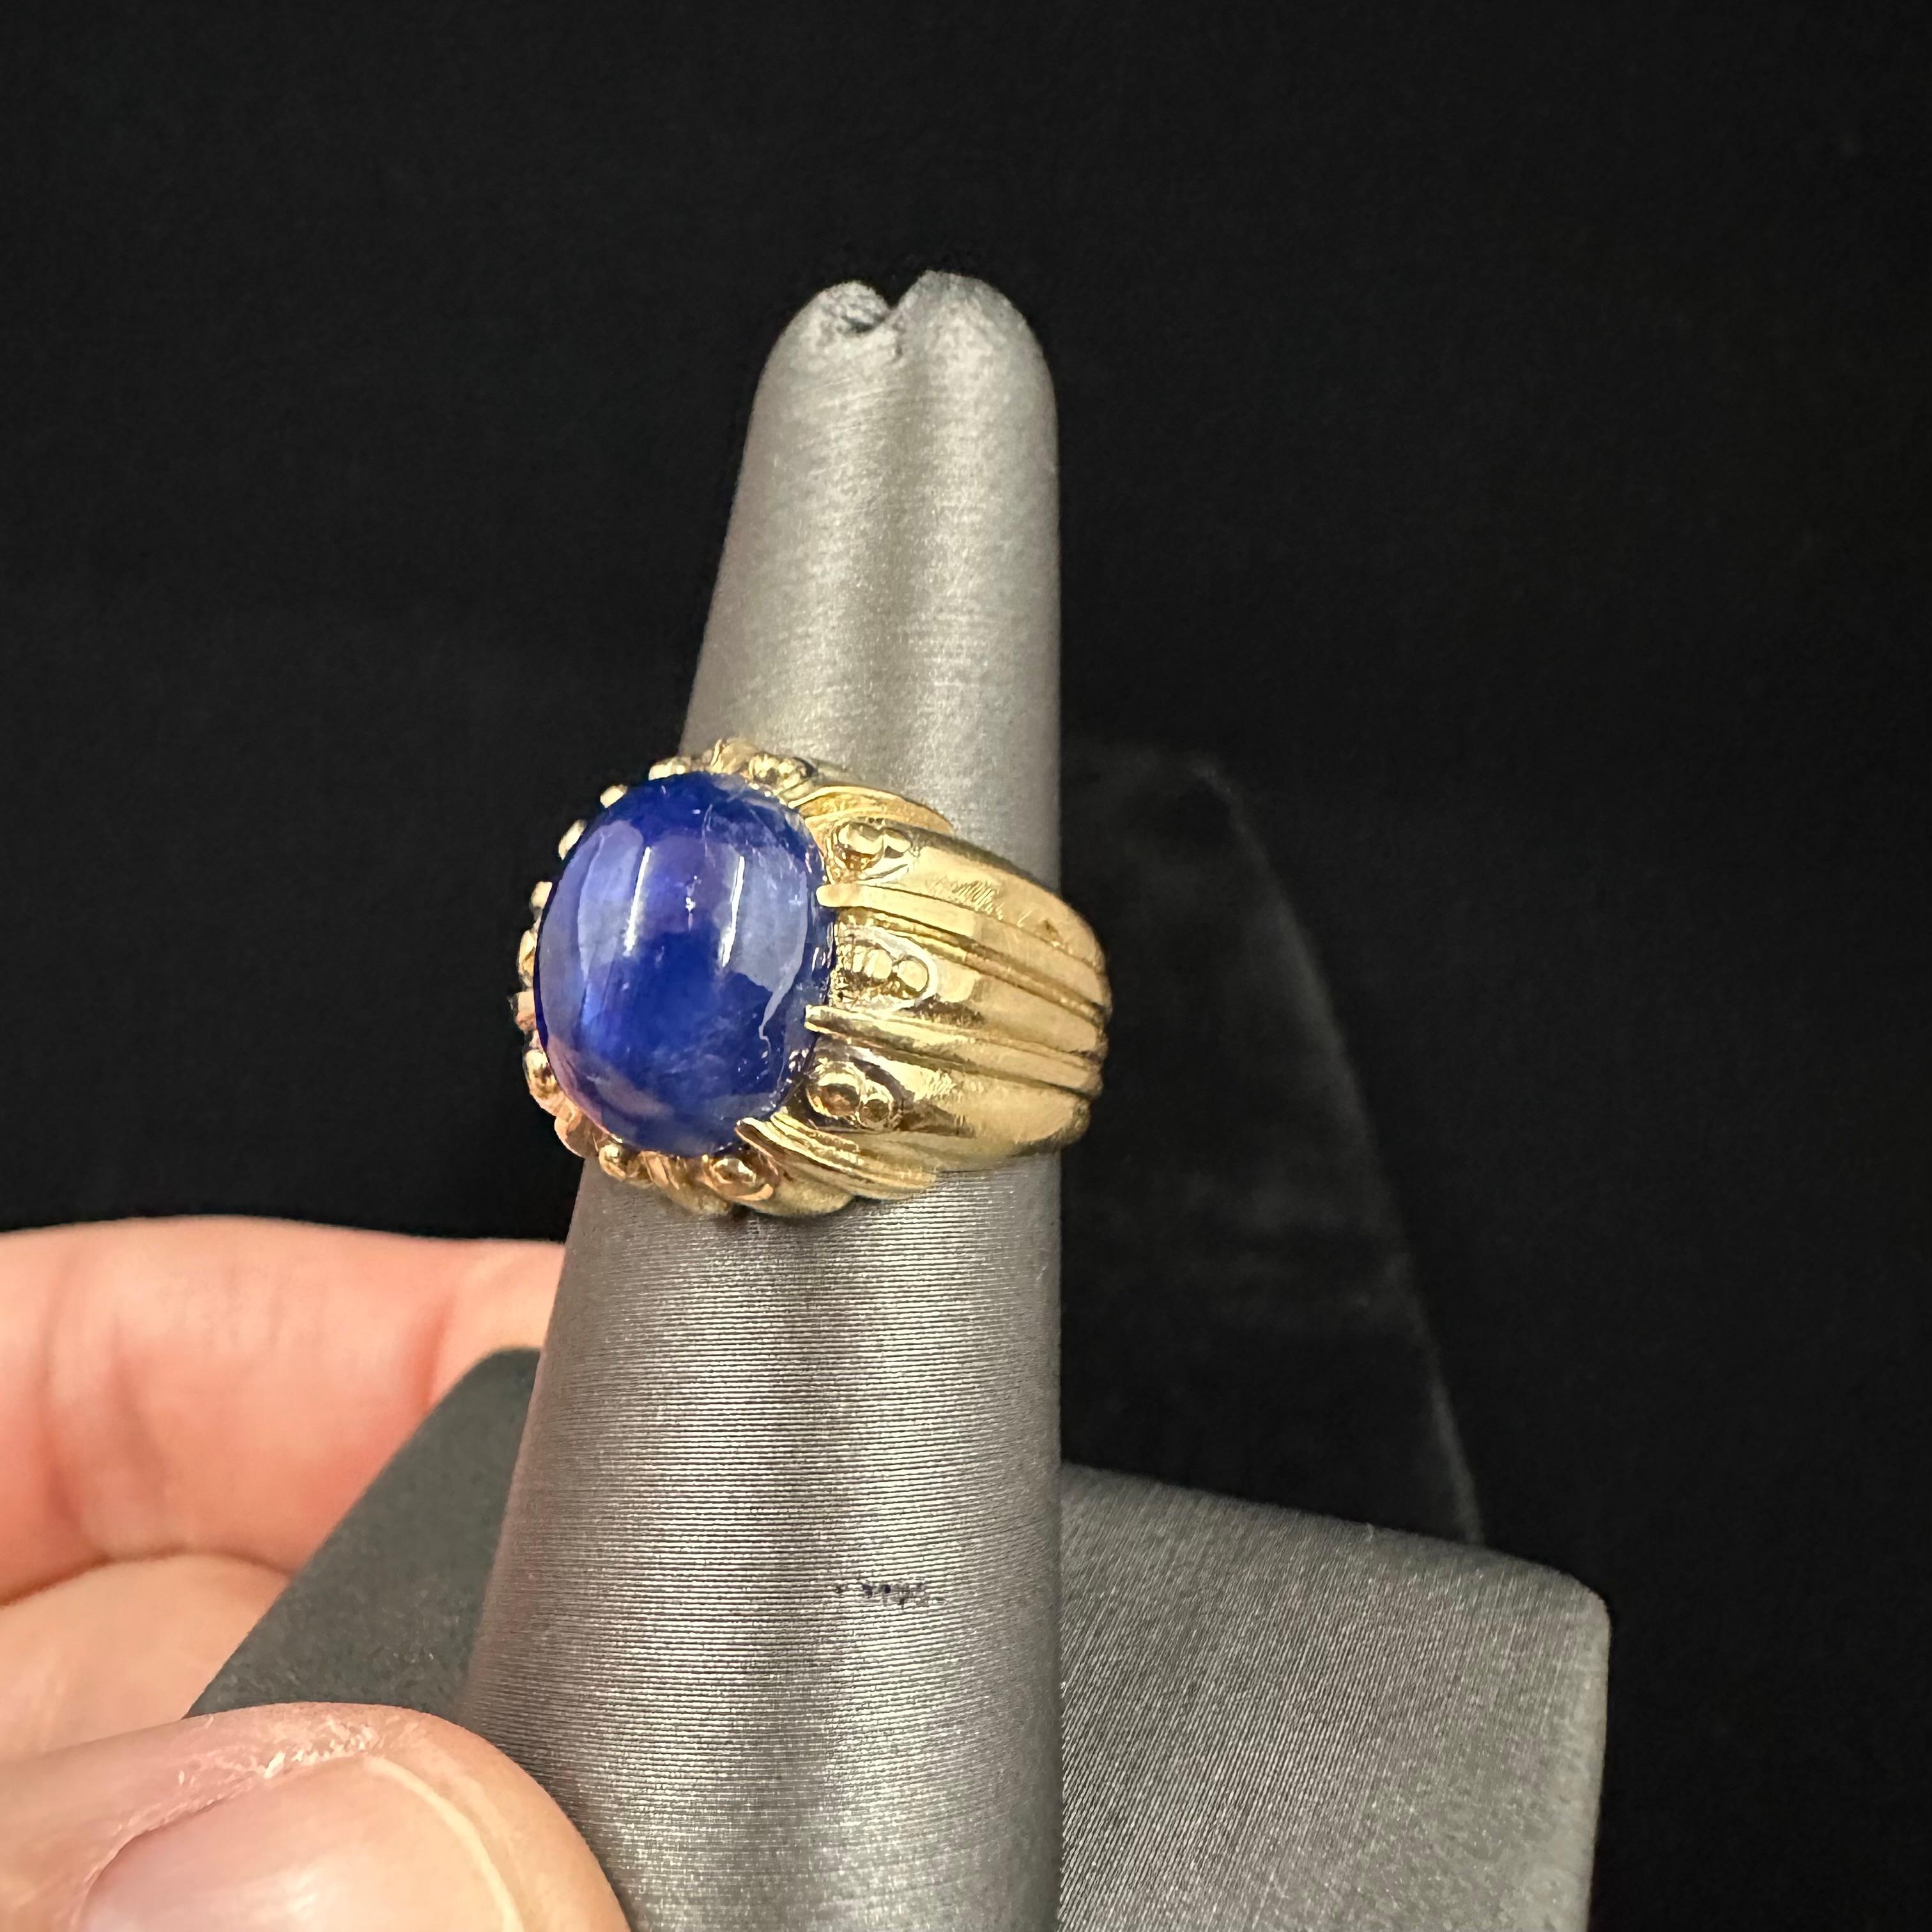 Van Cleef & Arpels Cabochon Burma Sapphire 7.32 cts  For Sale 1